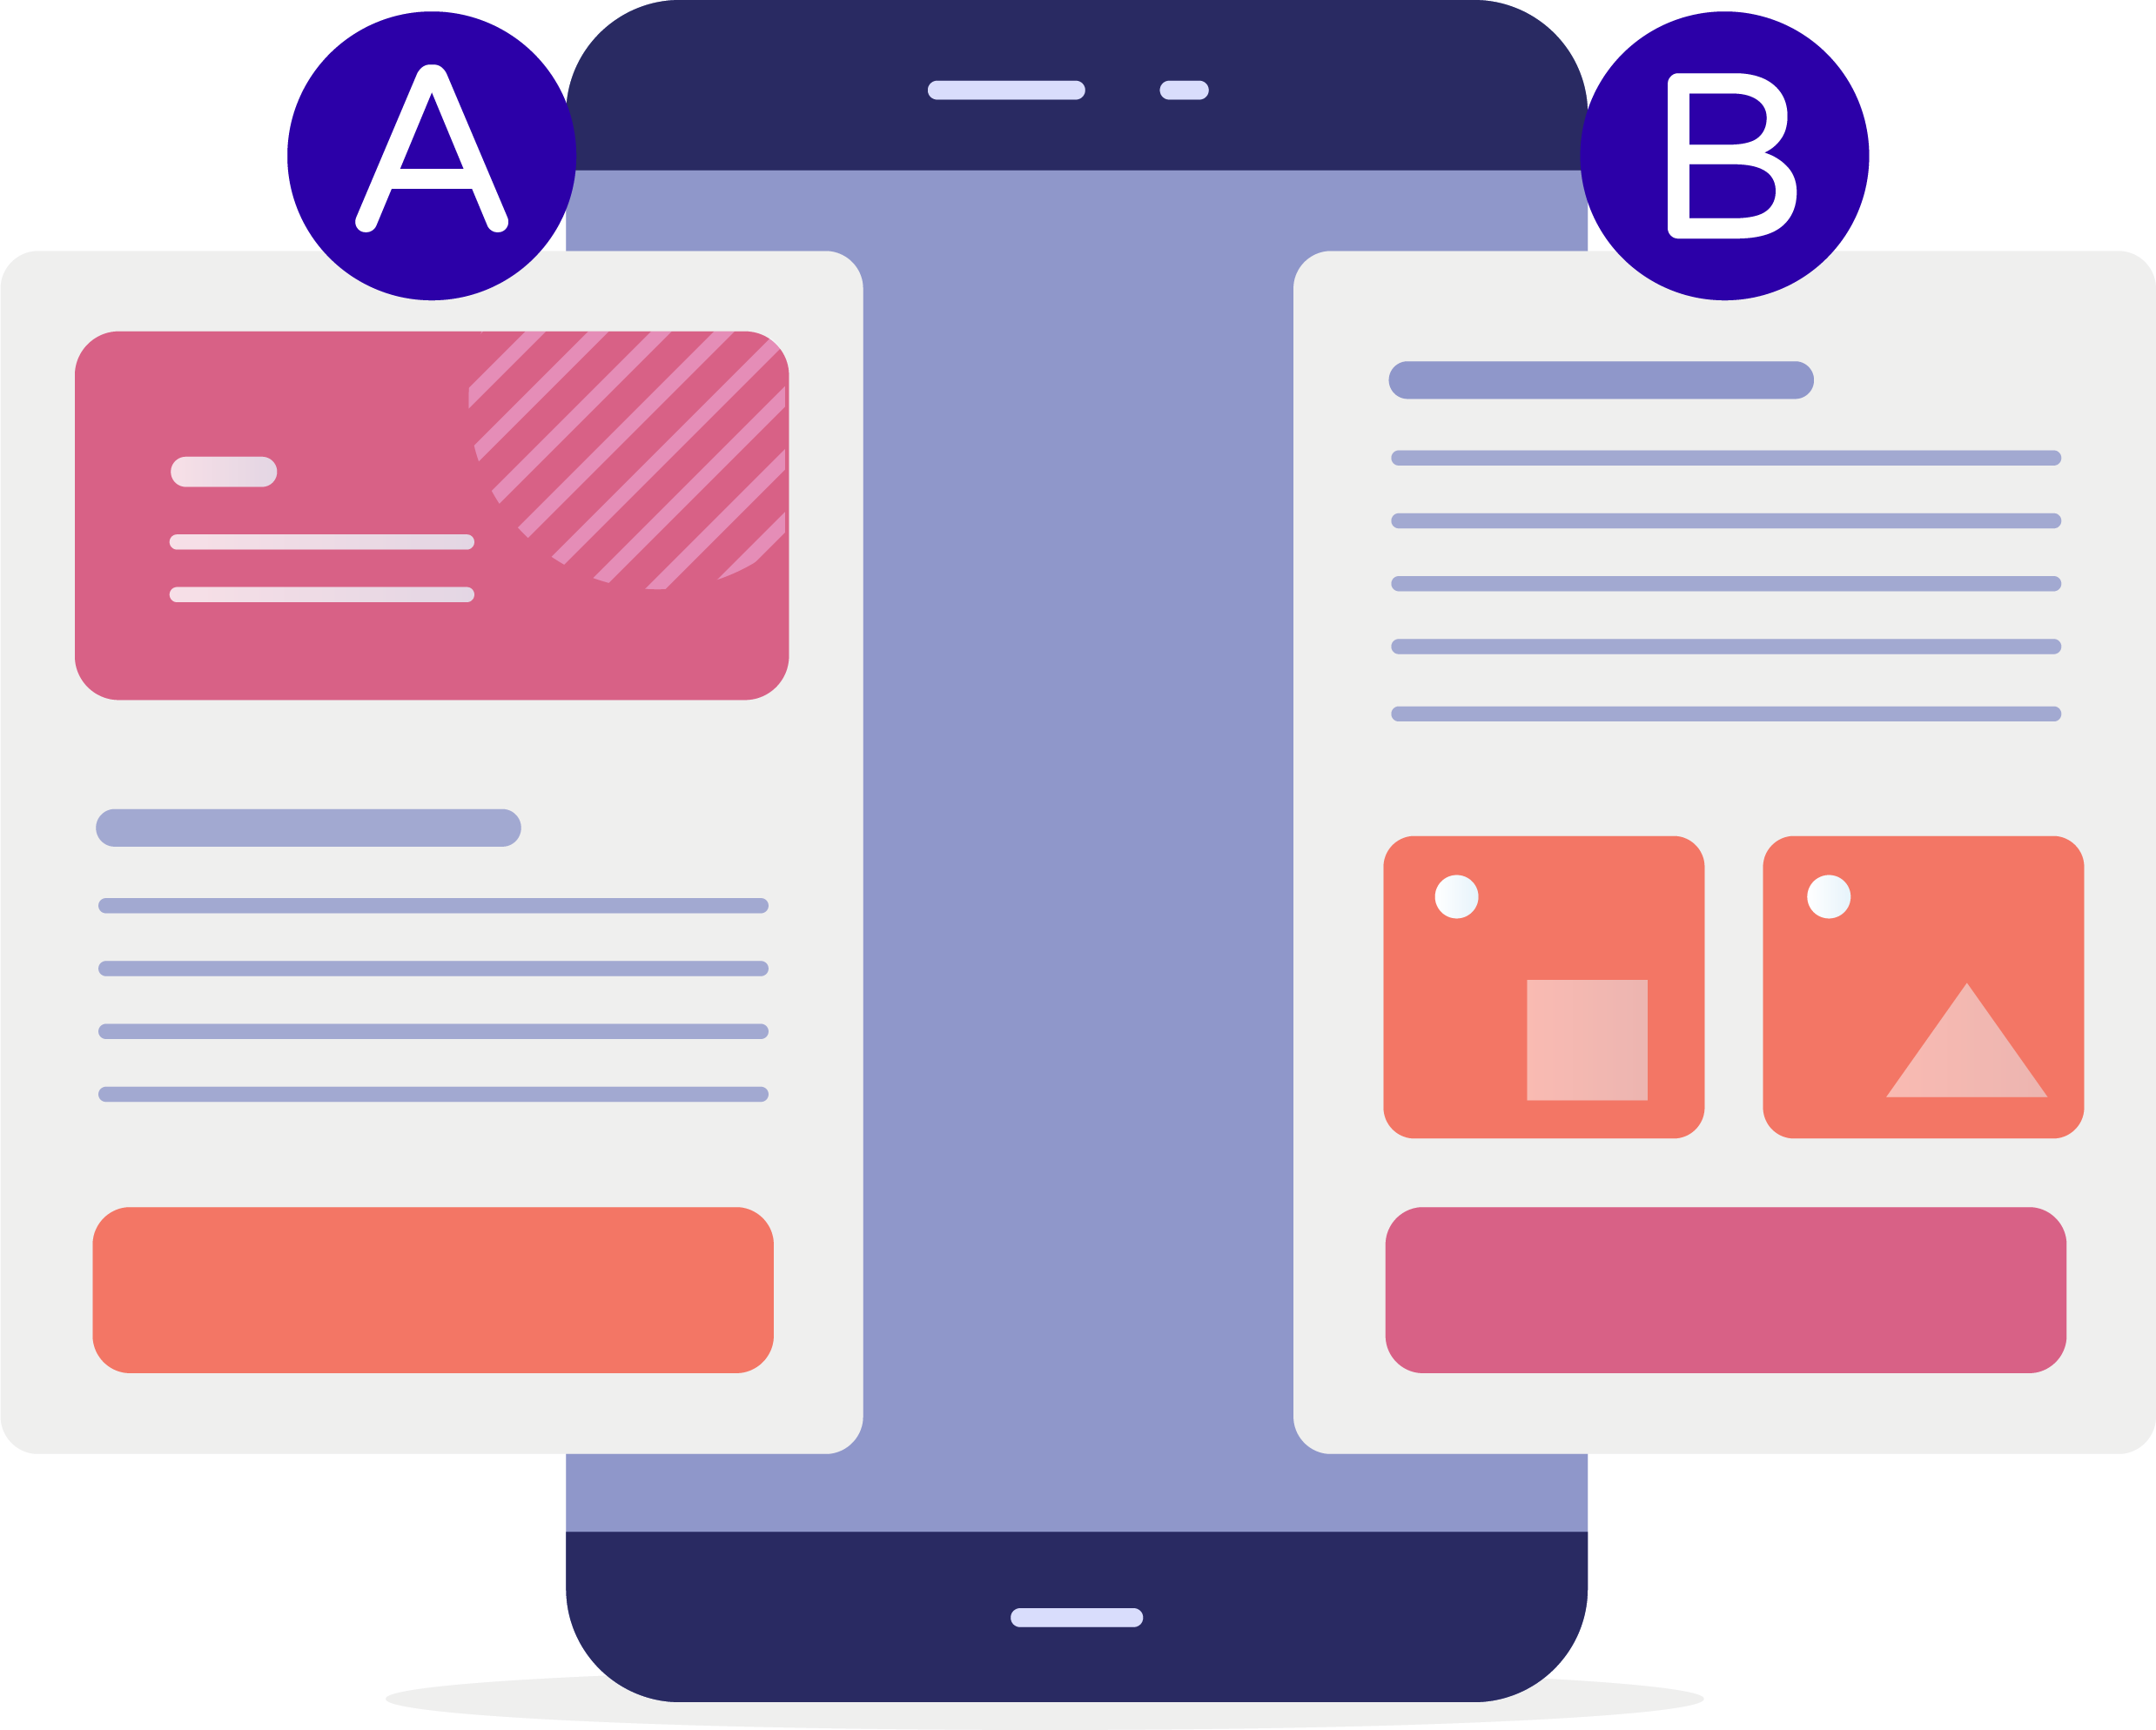 You can increase the number of opened emails by means of A/B testing.